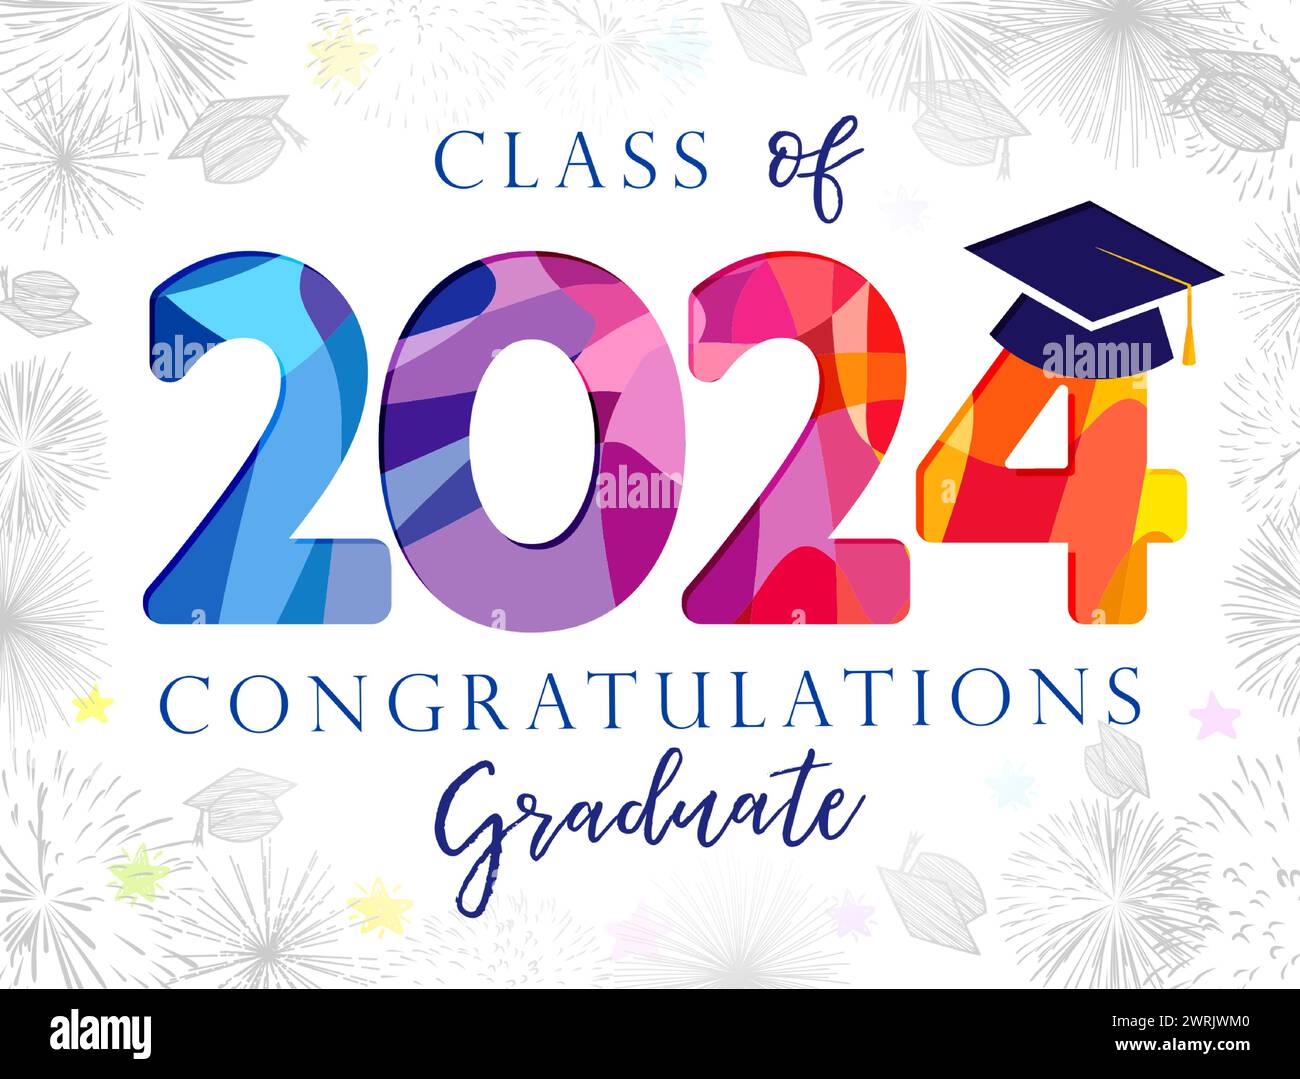 Cute graduating postcard for class of 2024 graduates. Invitation design. Educational festive background and trendy number 2 0 2 4 with academic cap. Stock Vector